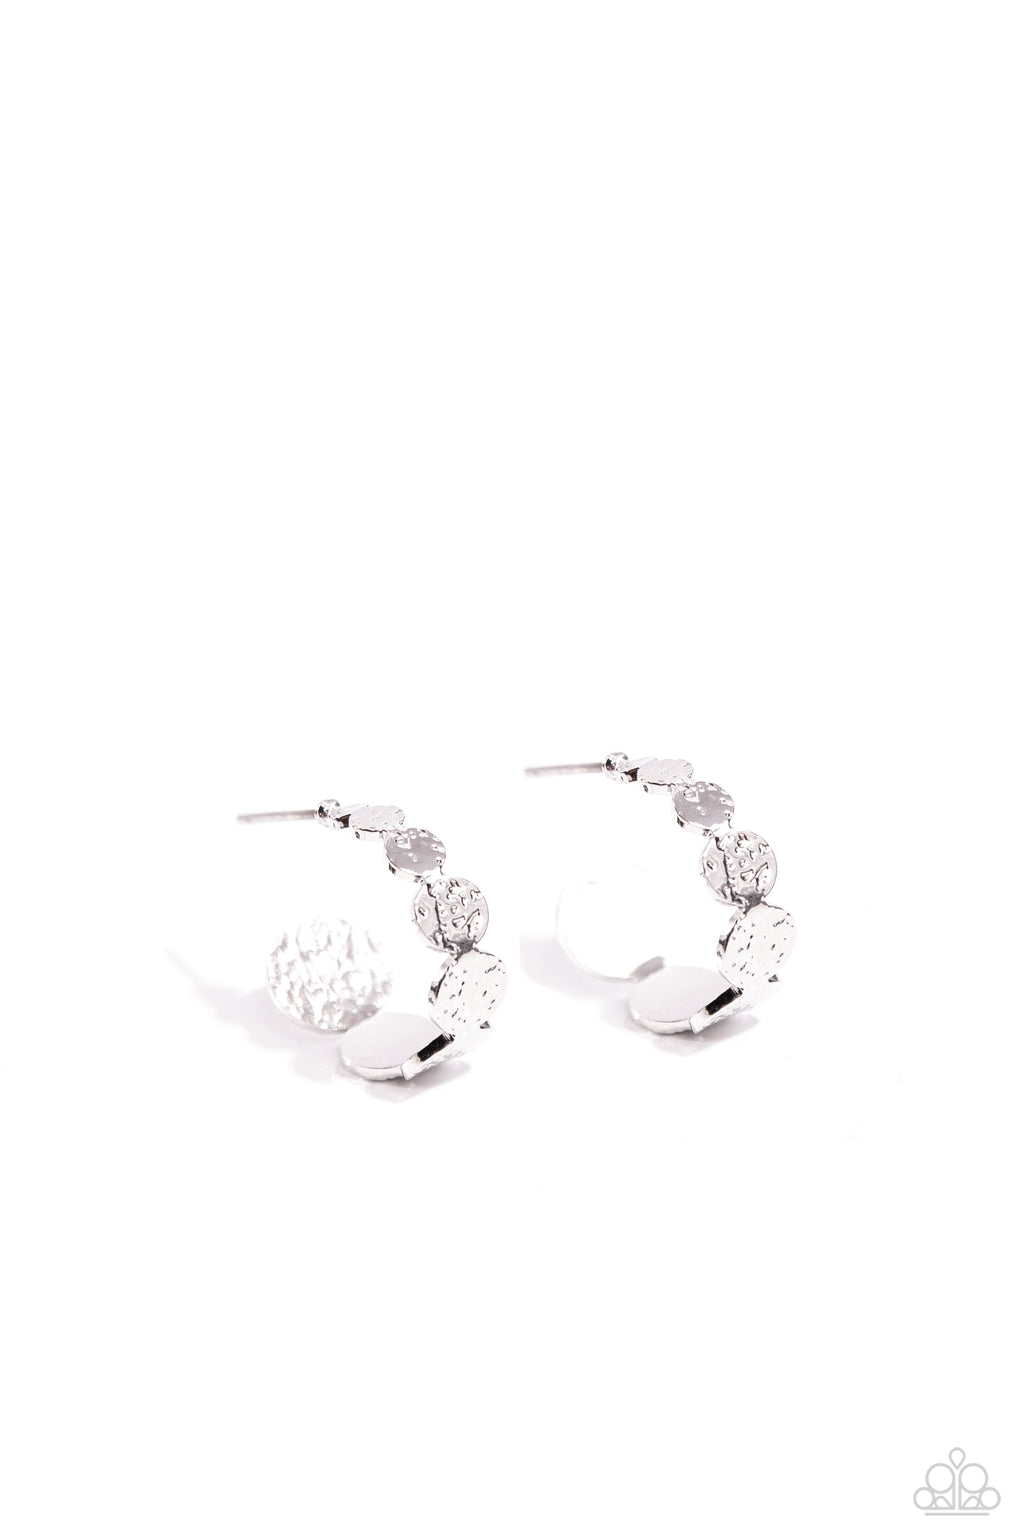 five-dollar-jewelry-textured-tease-silver-earrings-paparazzi-accessories